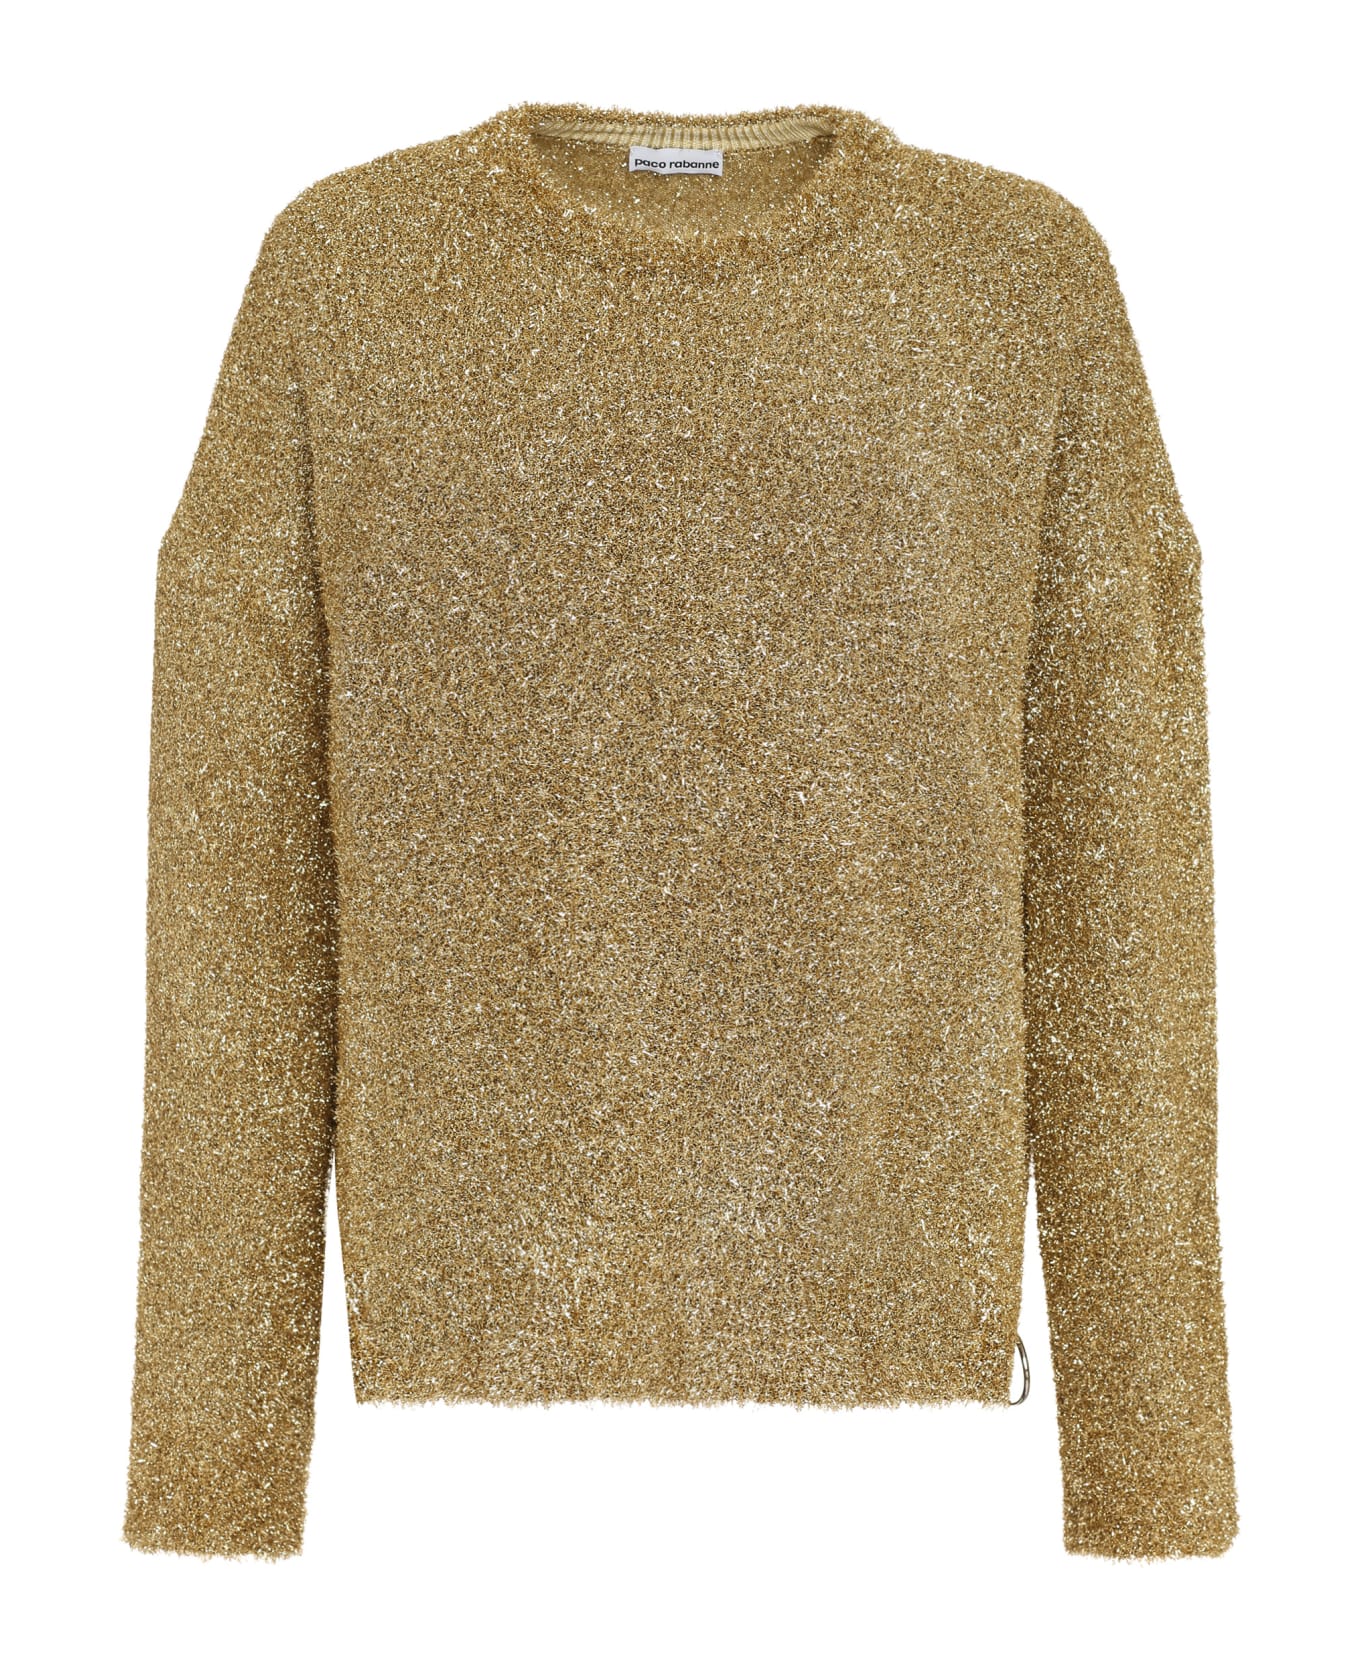 Paco Rabanne Long Sleeve Crew-neck Sweater - Gold